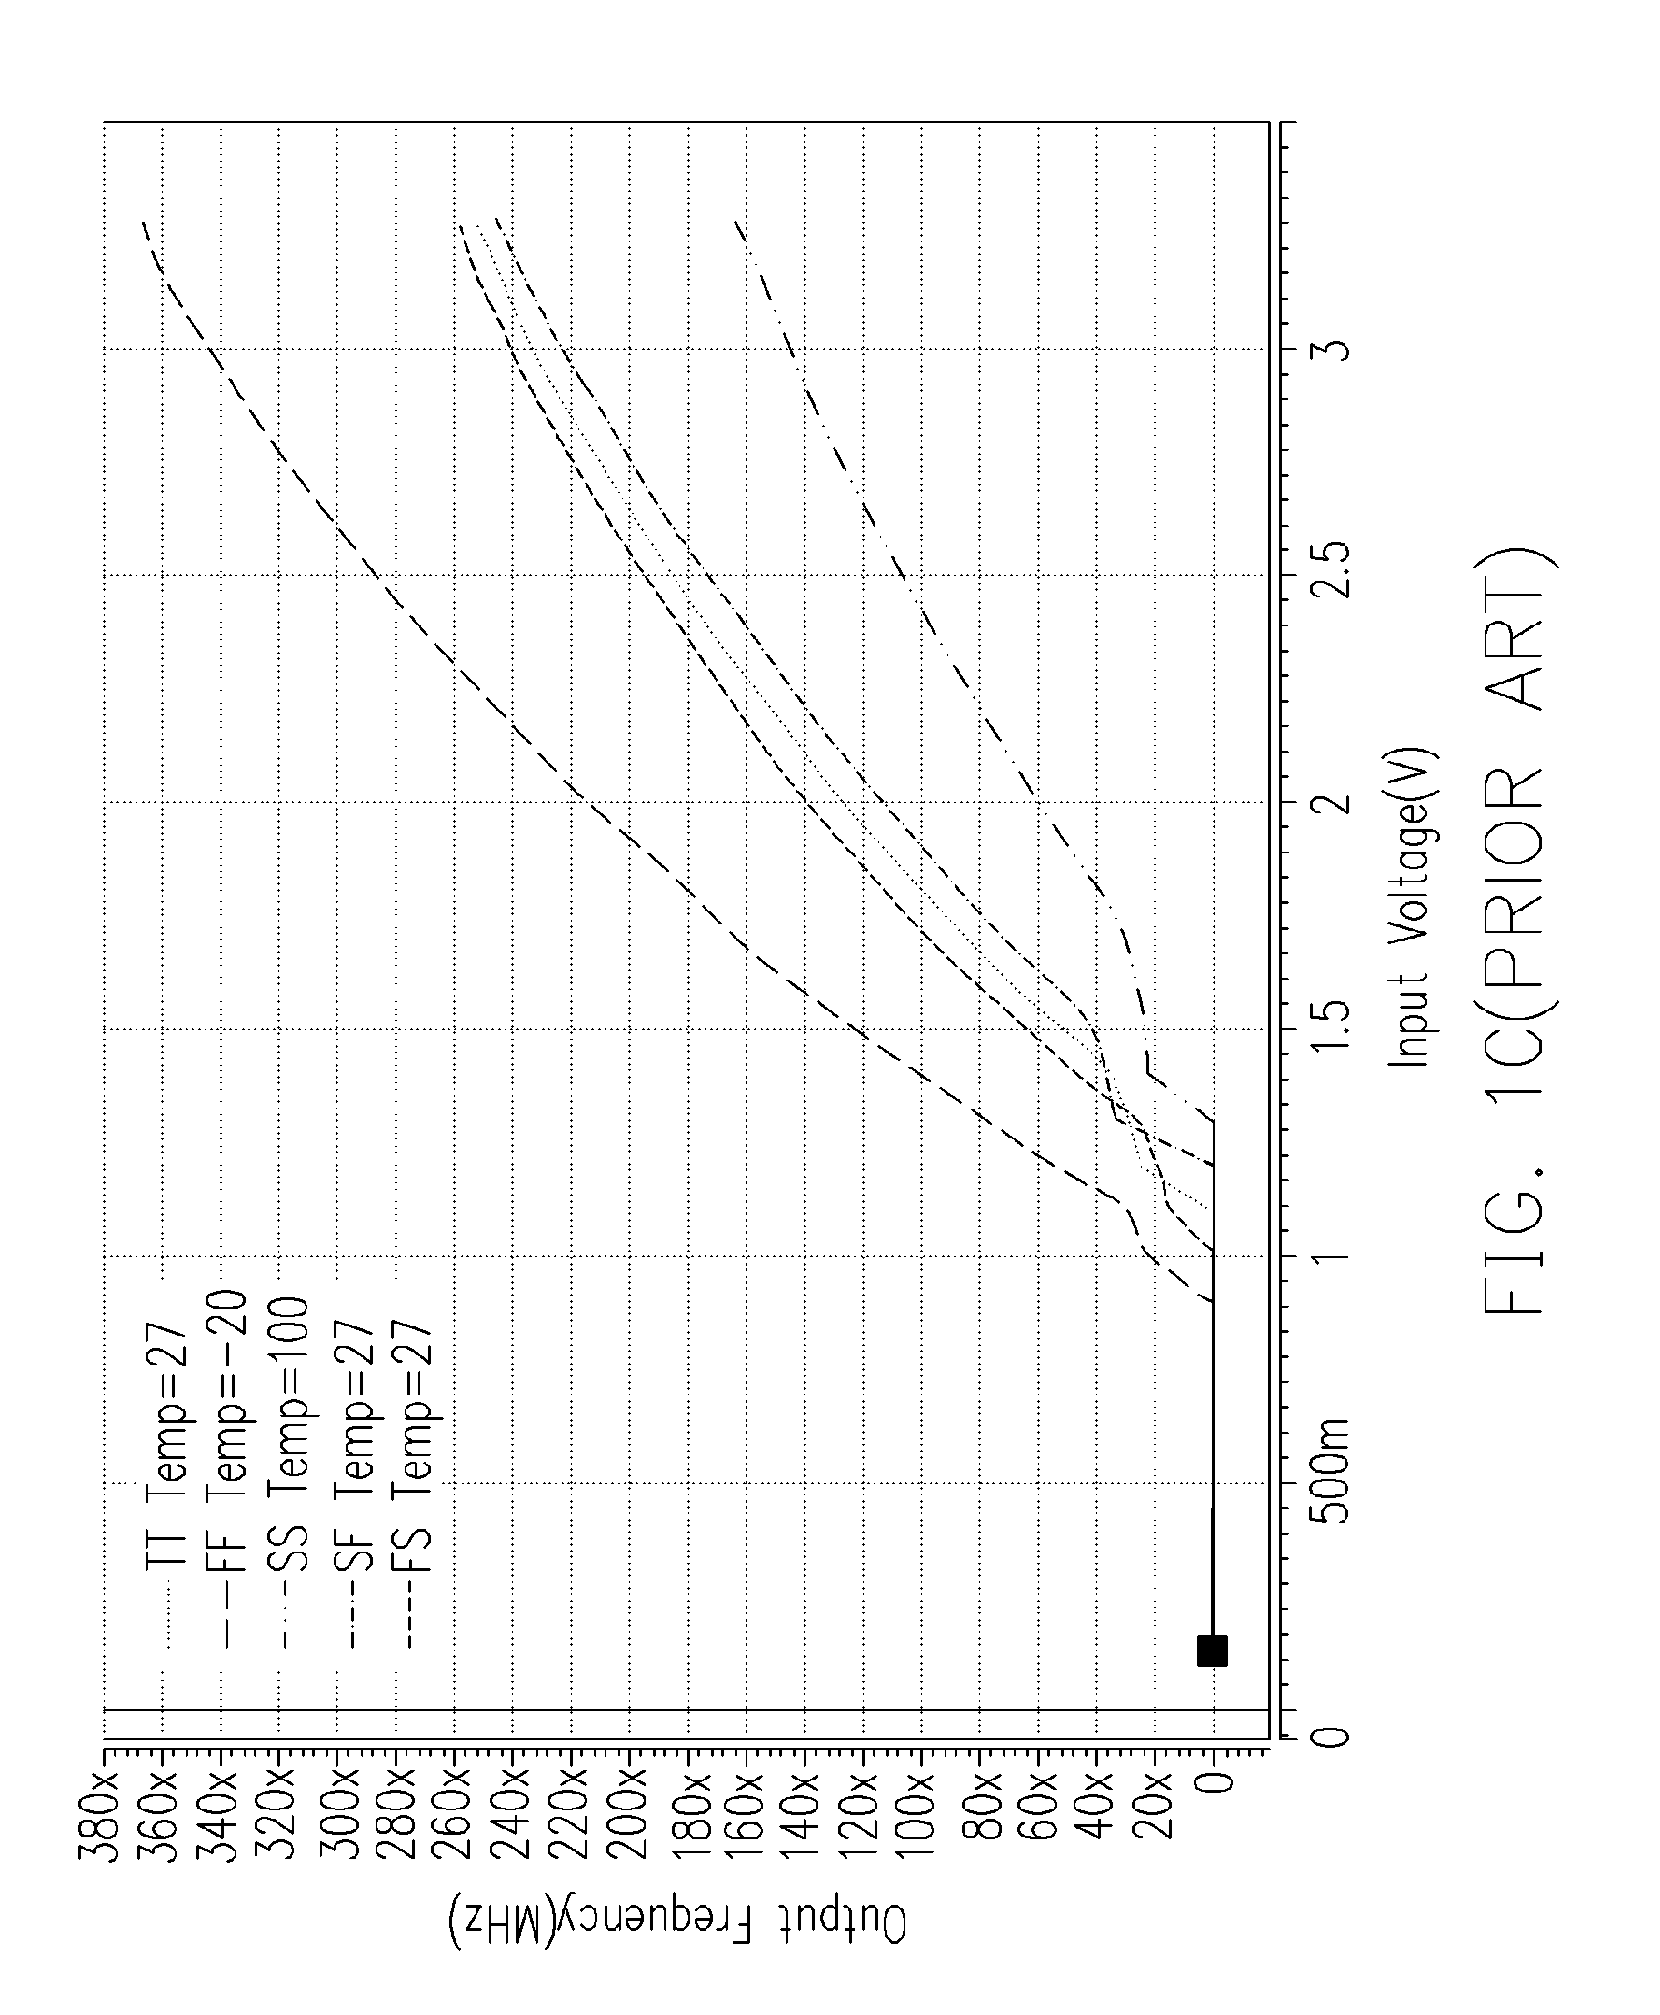 Voltage controlled oscillator with temperature and process compensation